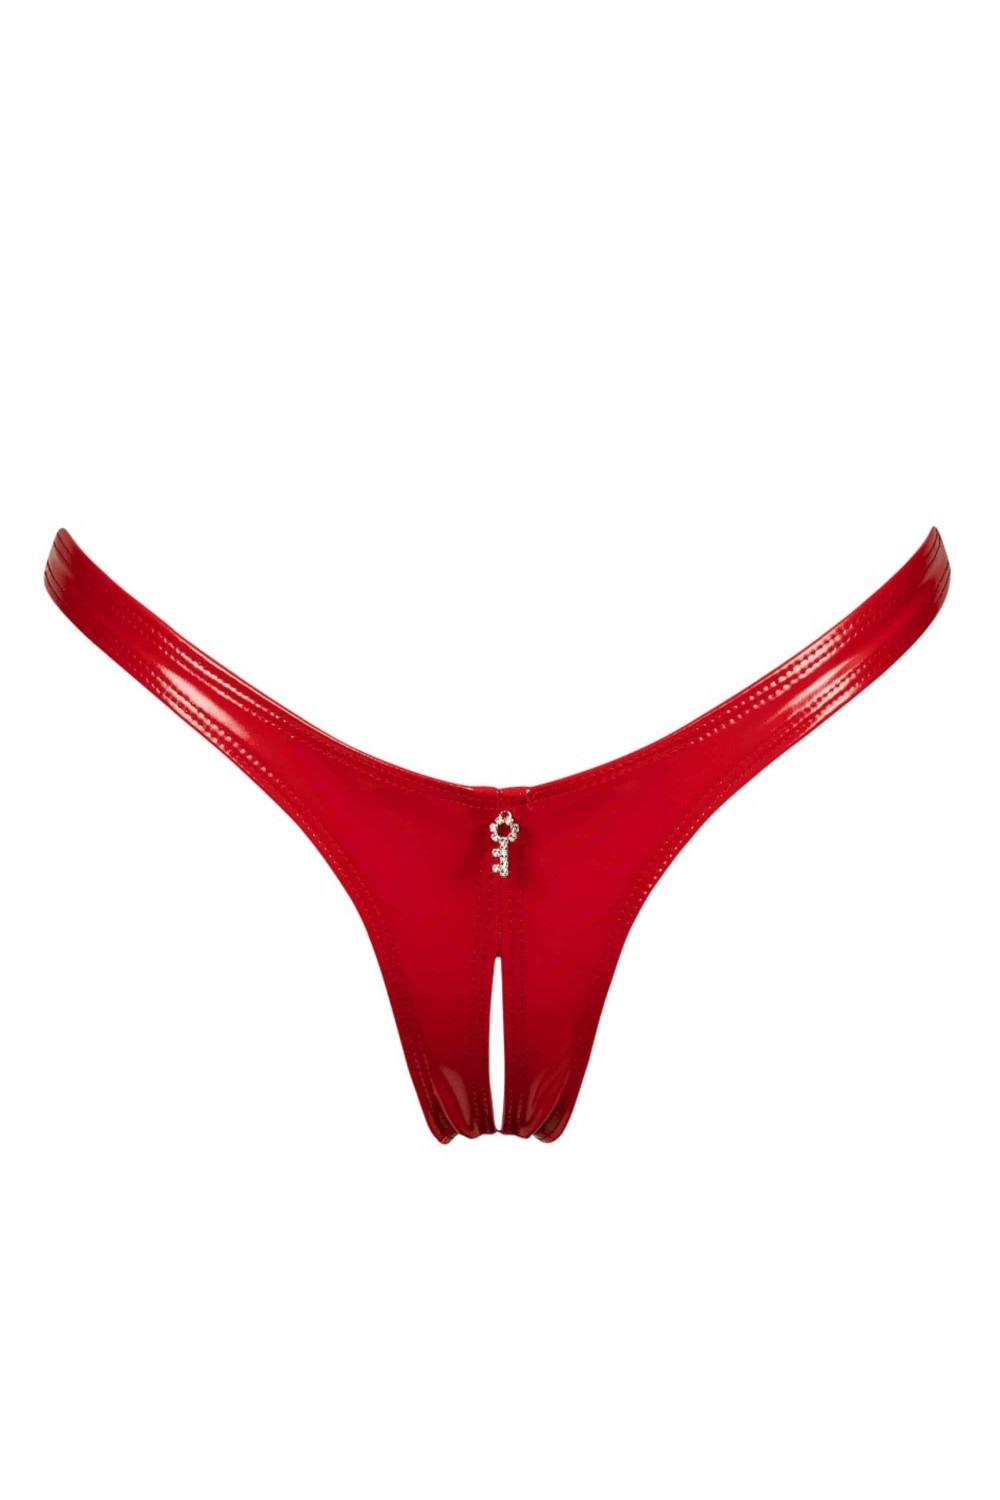 Annabelle vinyl crotchless thong - Patrice Catanzaro Official Website